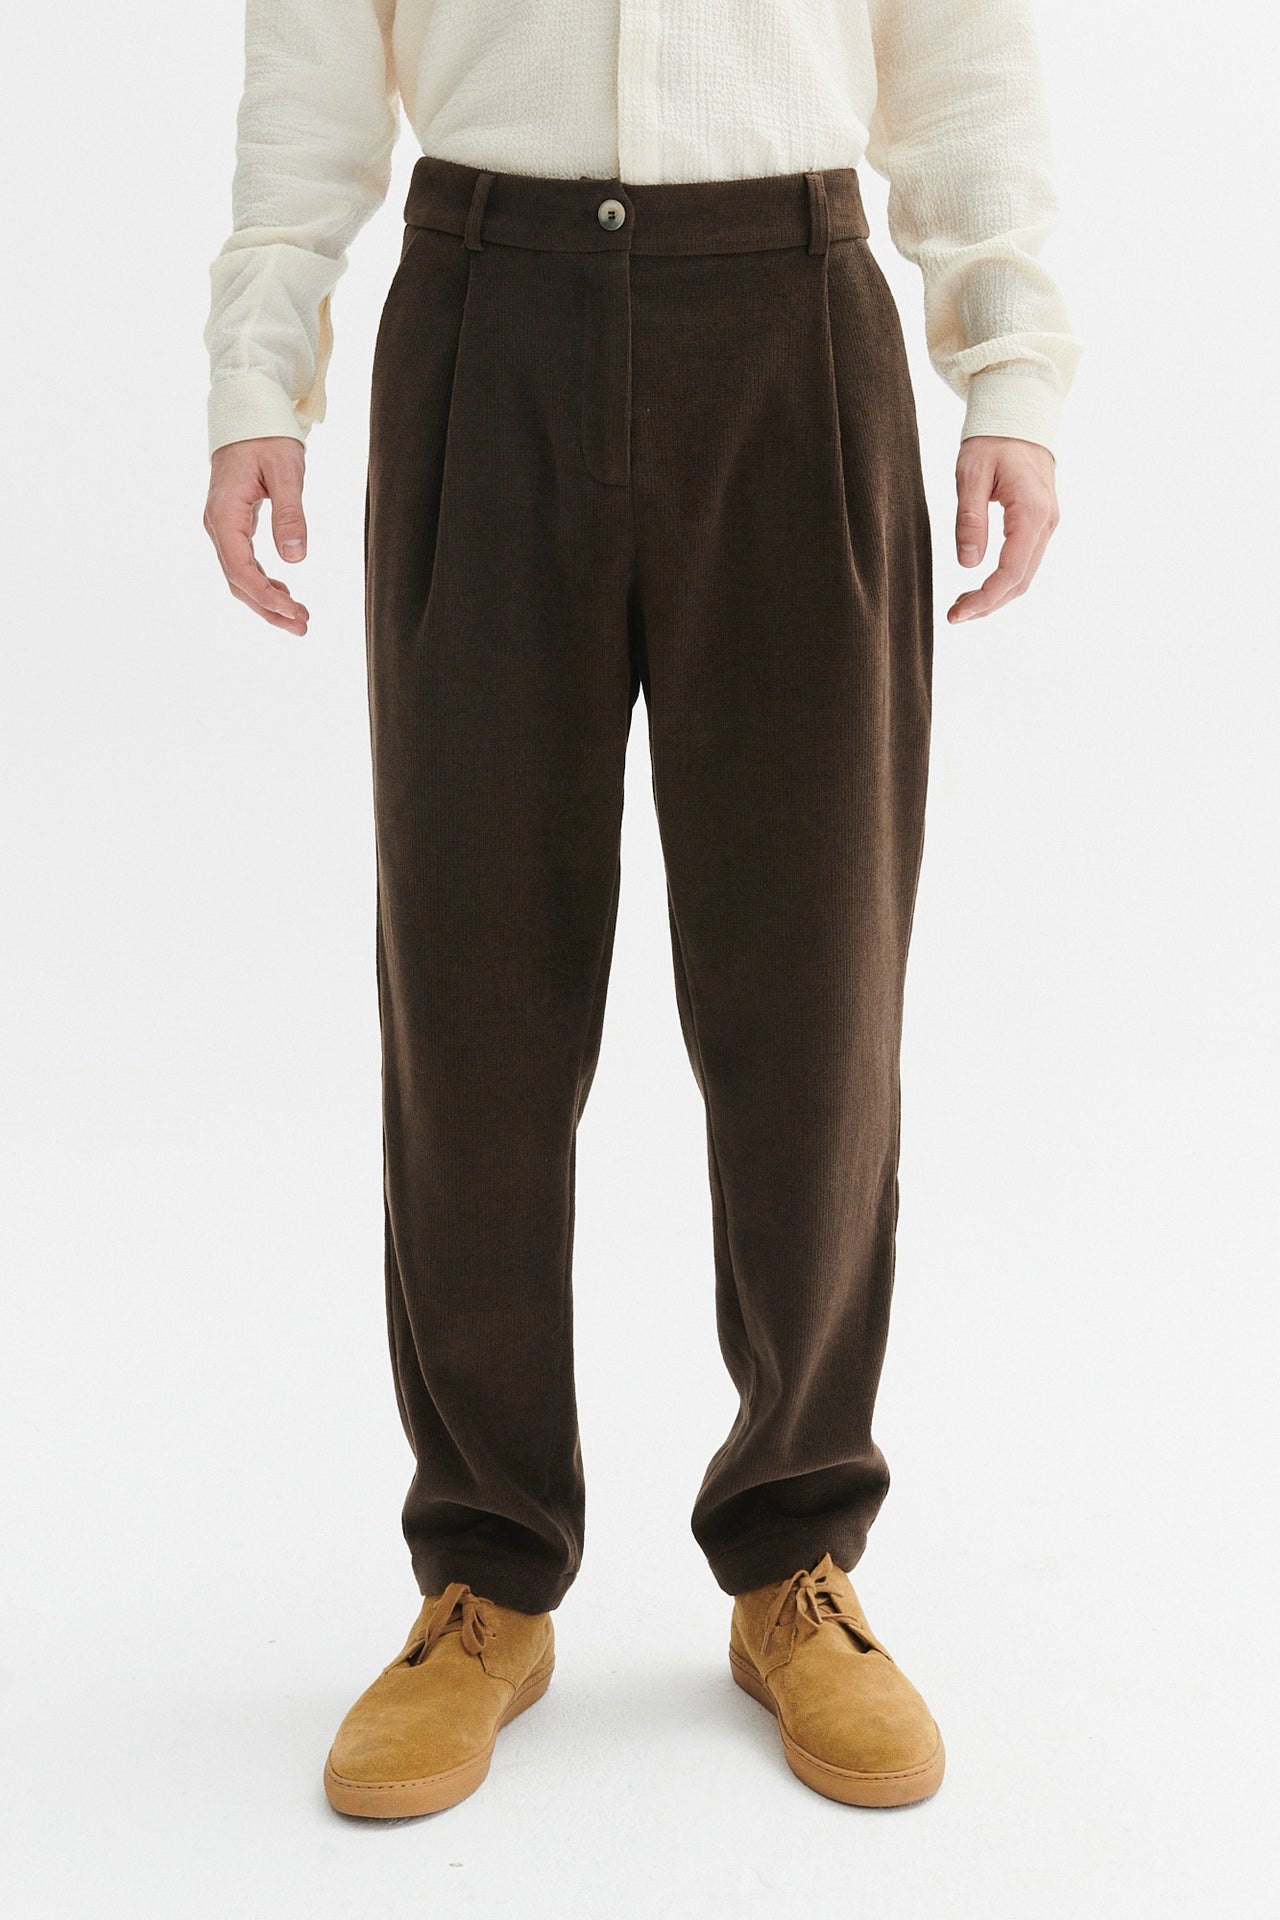 Genuine Trousers in a Brown Italian Organic Cotton and Wool by Albini